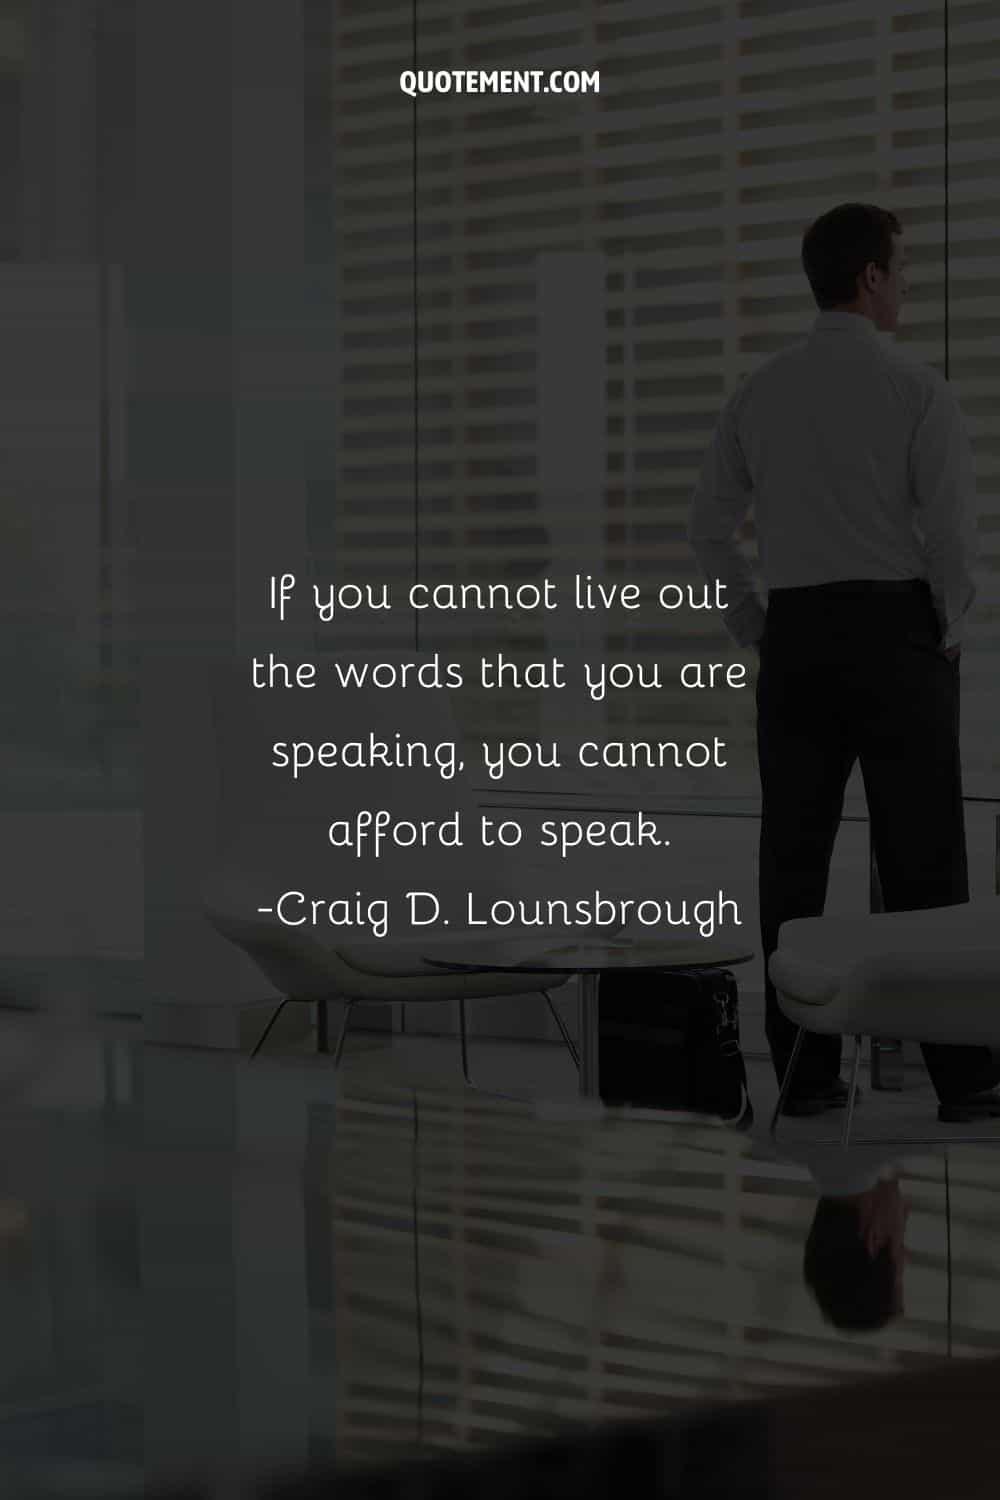 If you cannot live out the words that you are speaking, you cannot afford to speak